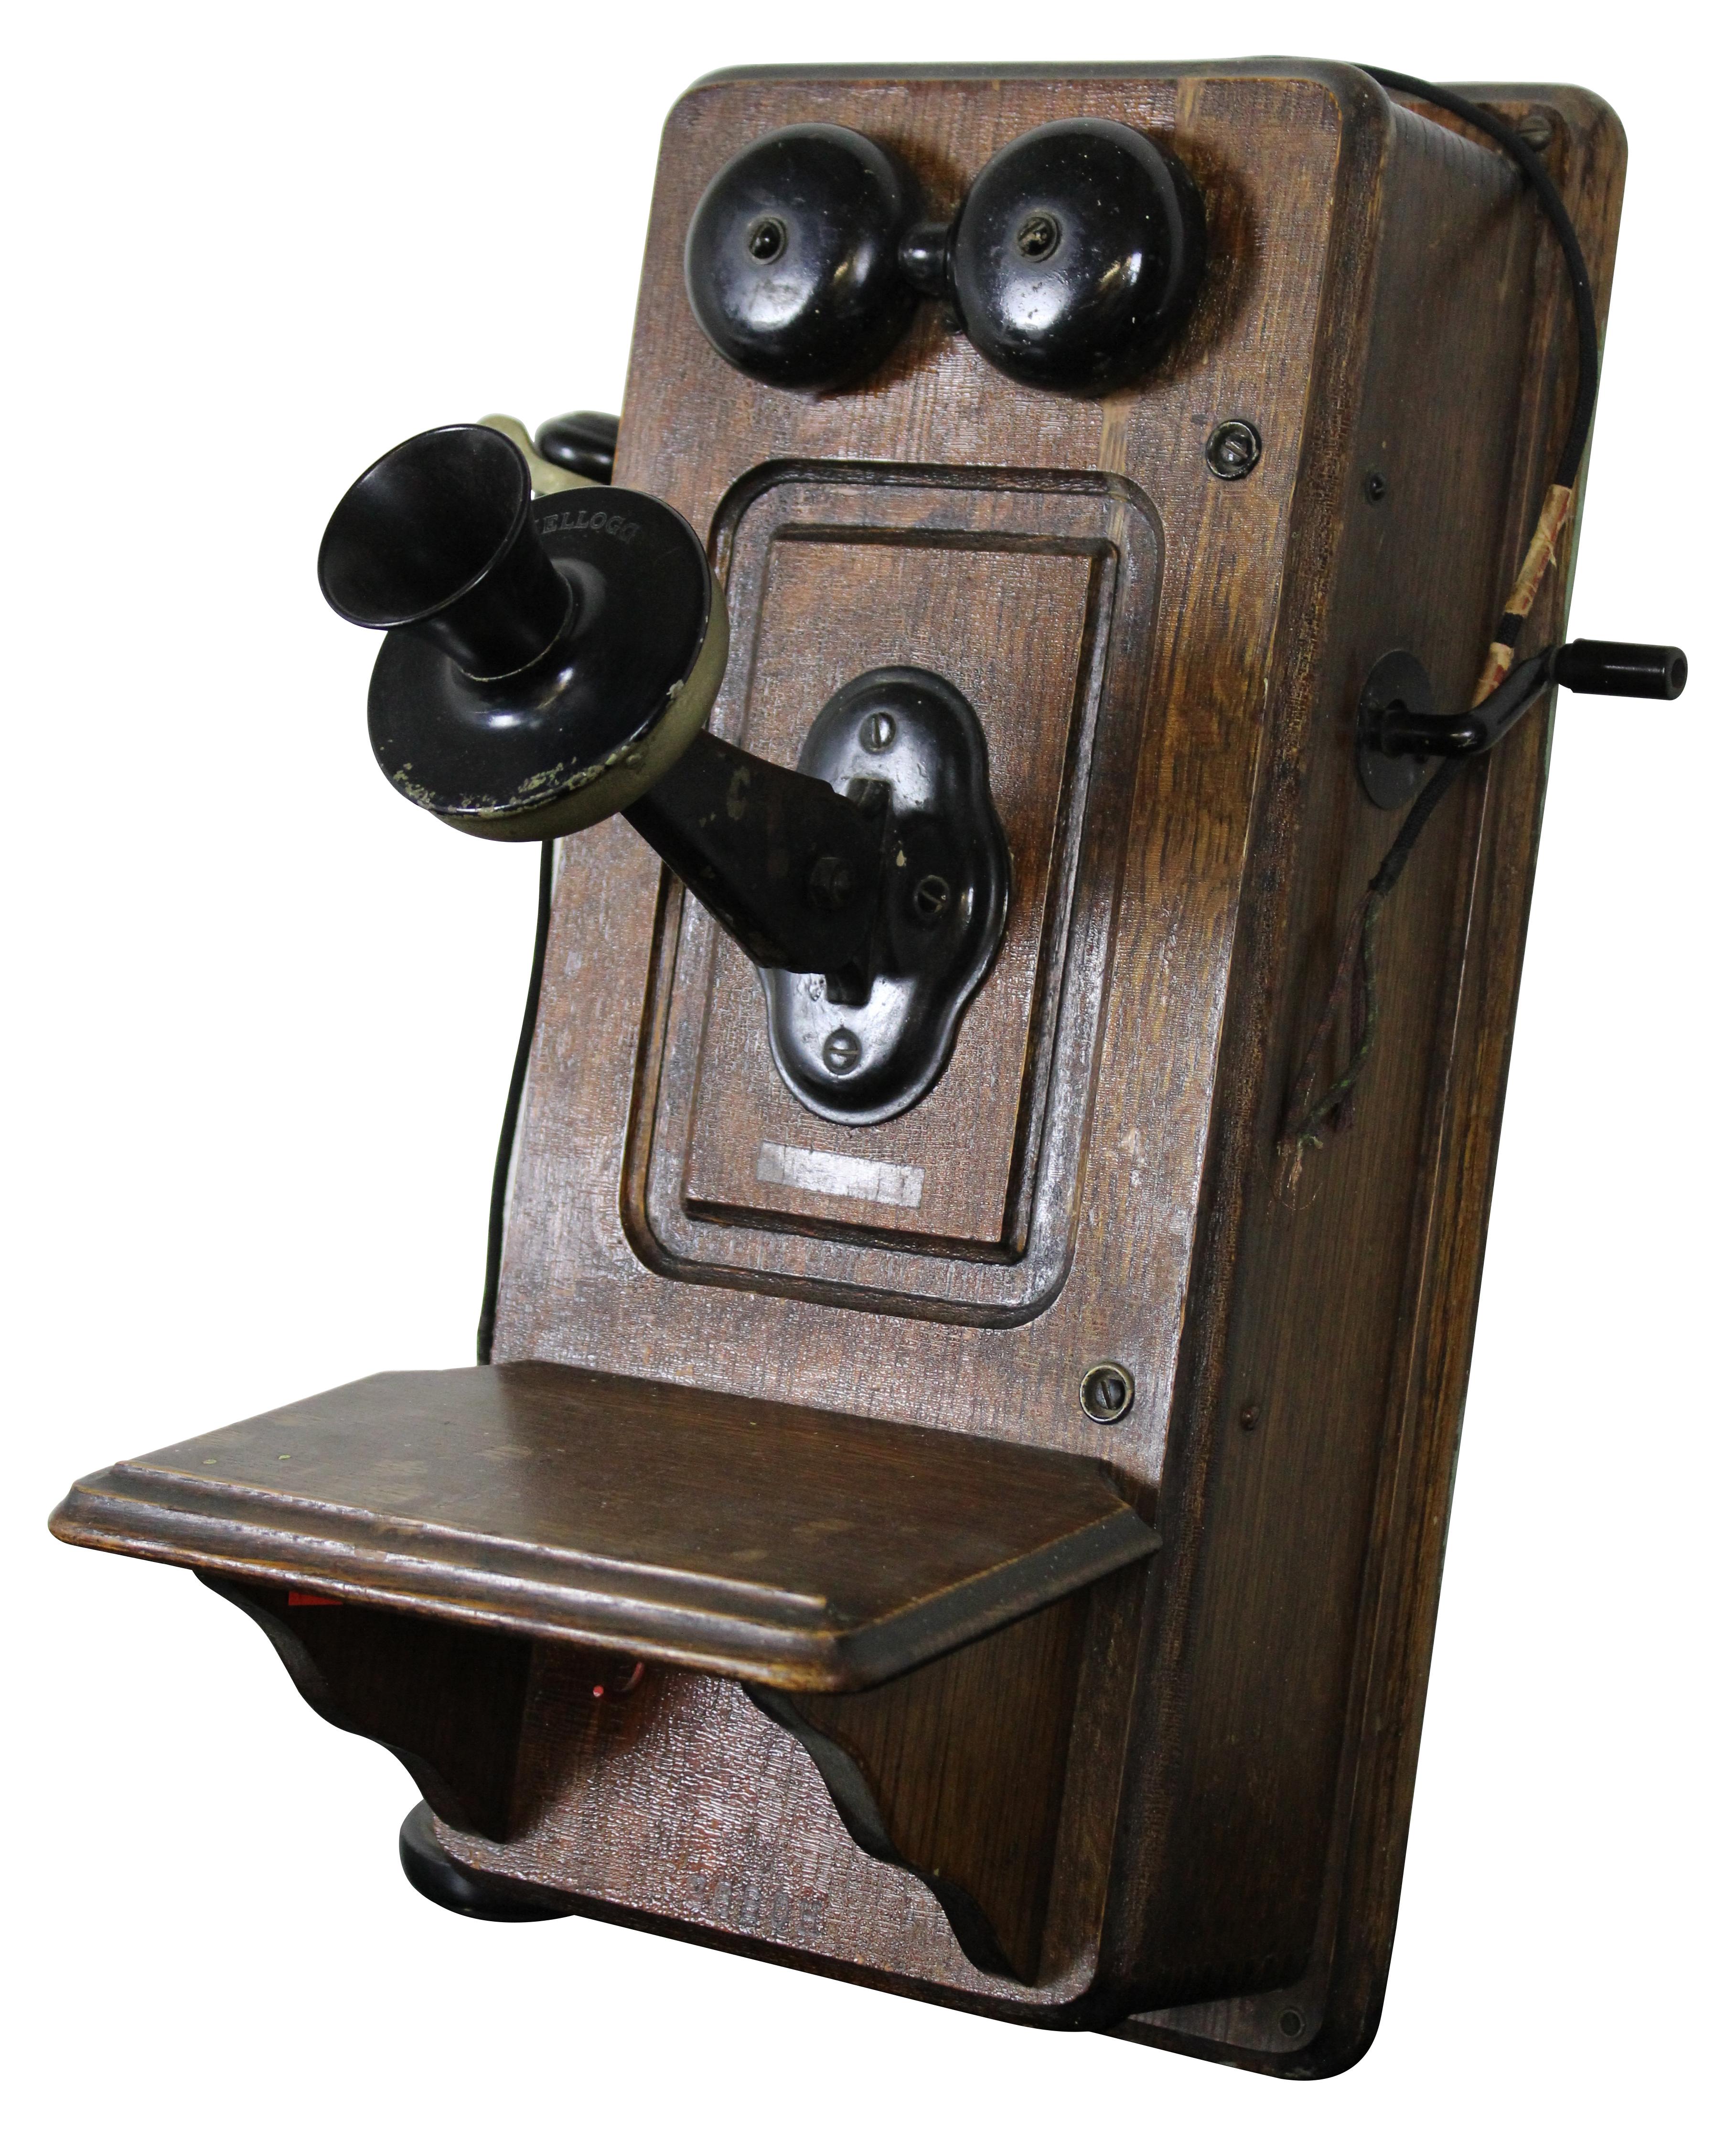 Antique early 1900s quartersawn tiger oak wall mounted telephone by the Kellogg Switchboard and Supply Company.
 